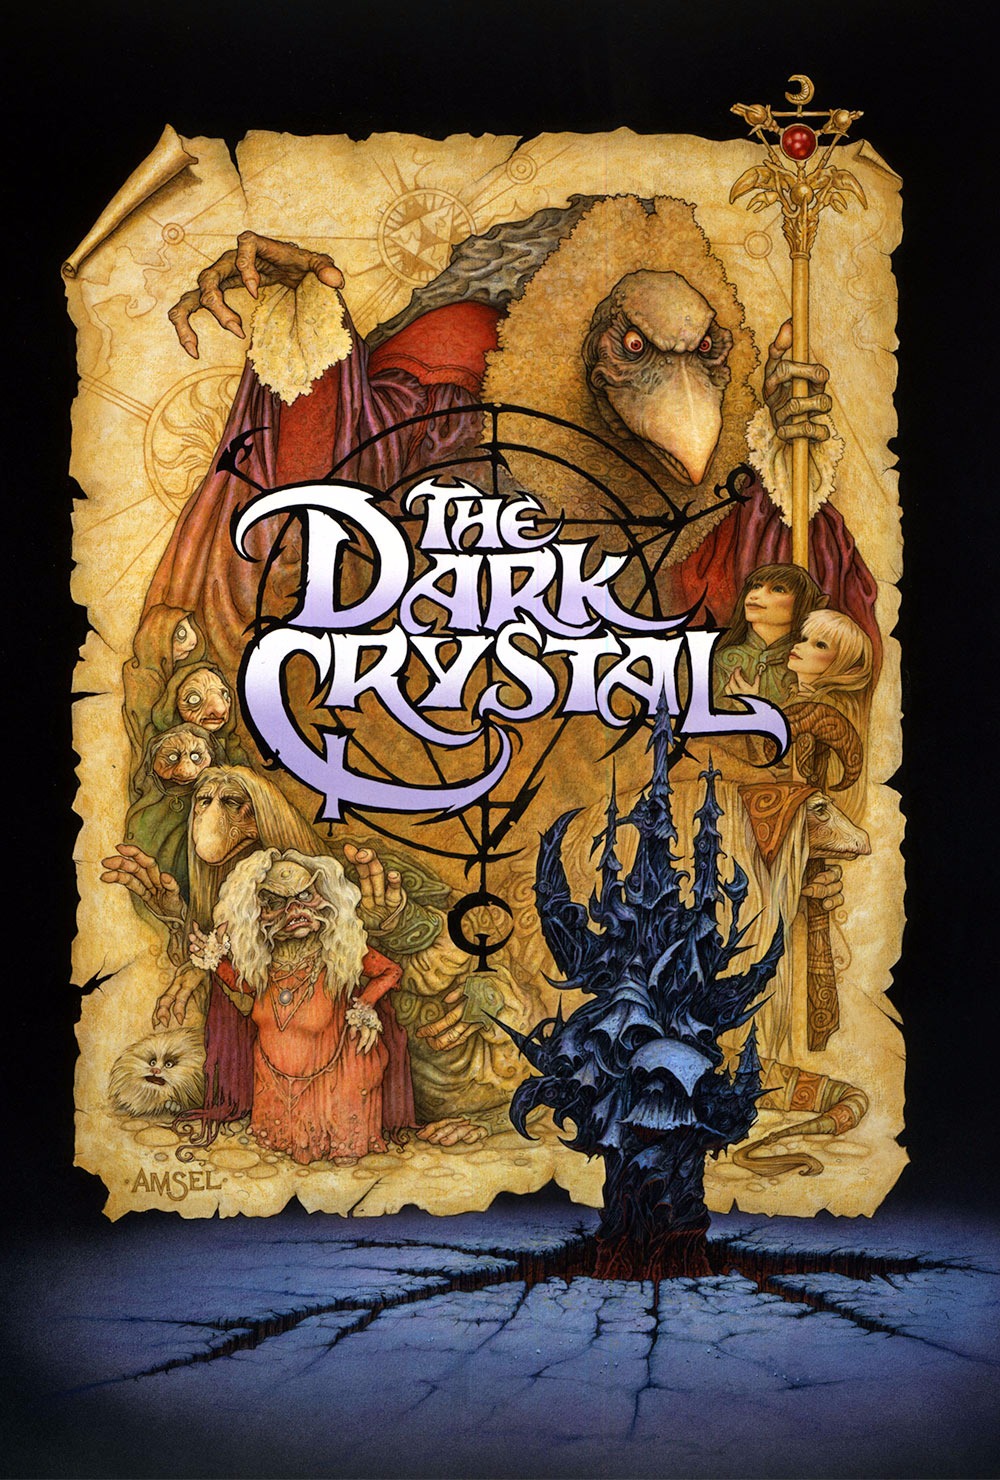 “The Dark Crystal” Returns to the Big and Small Screen